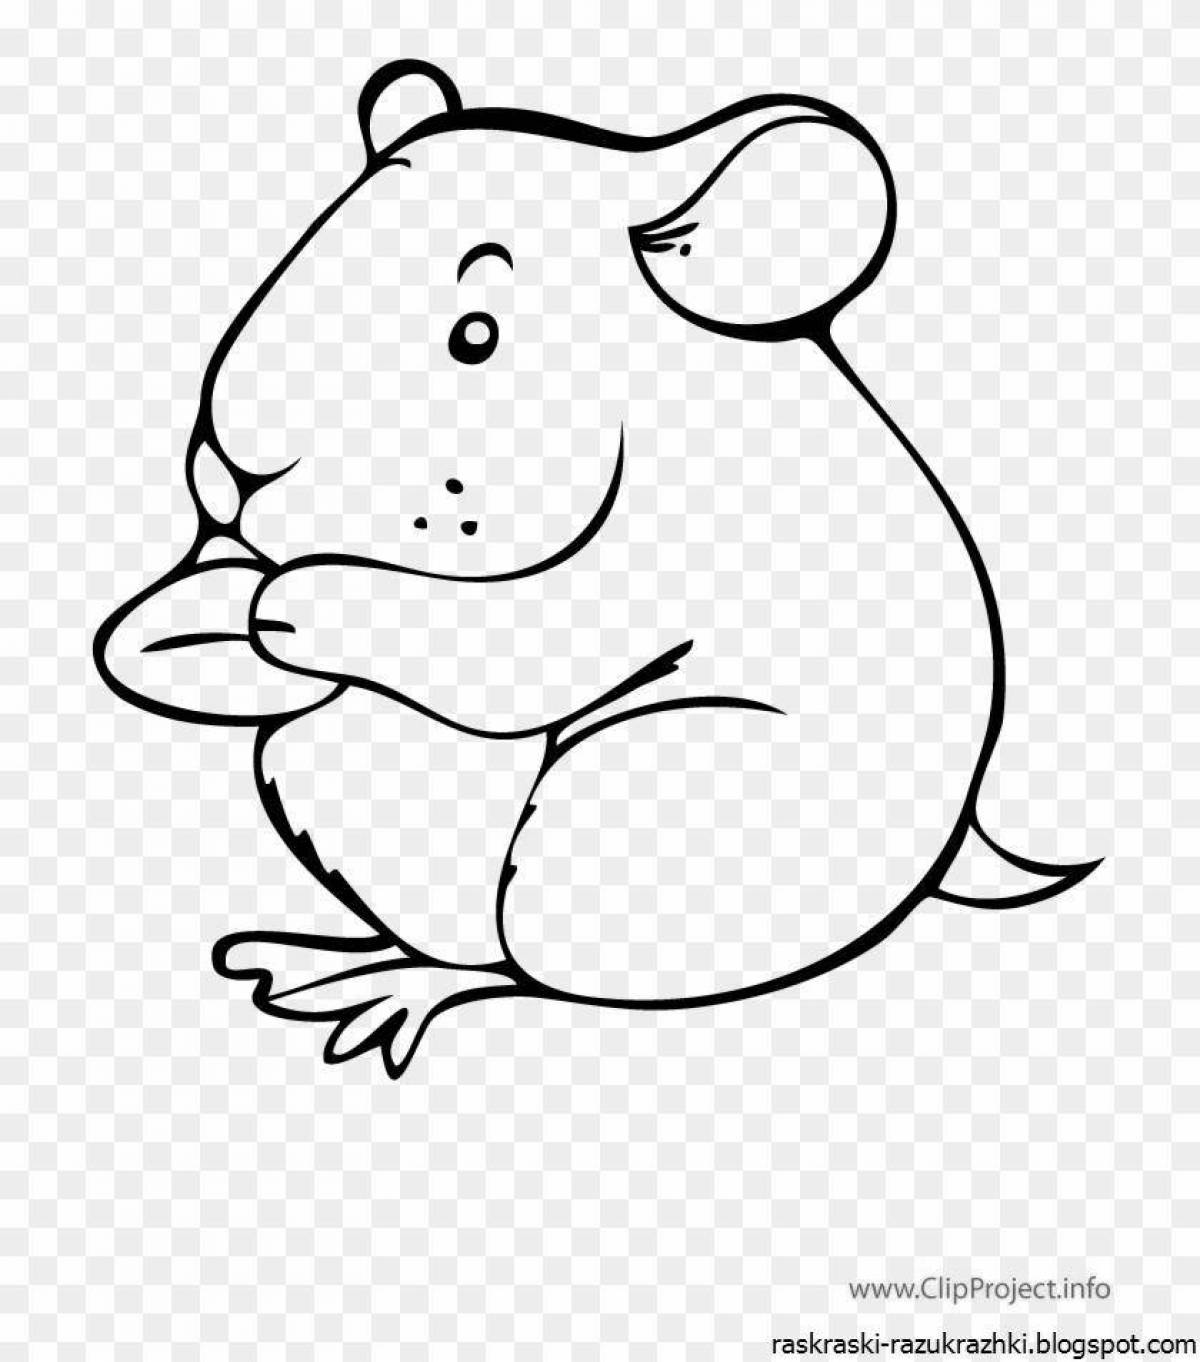 Tiny hamster for coloring for toddlers